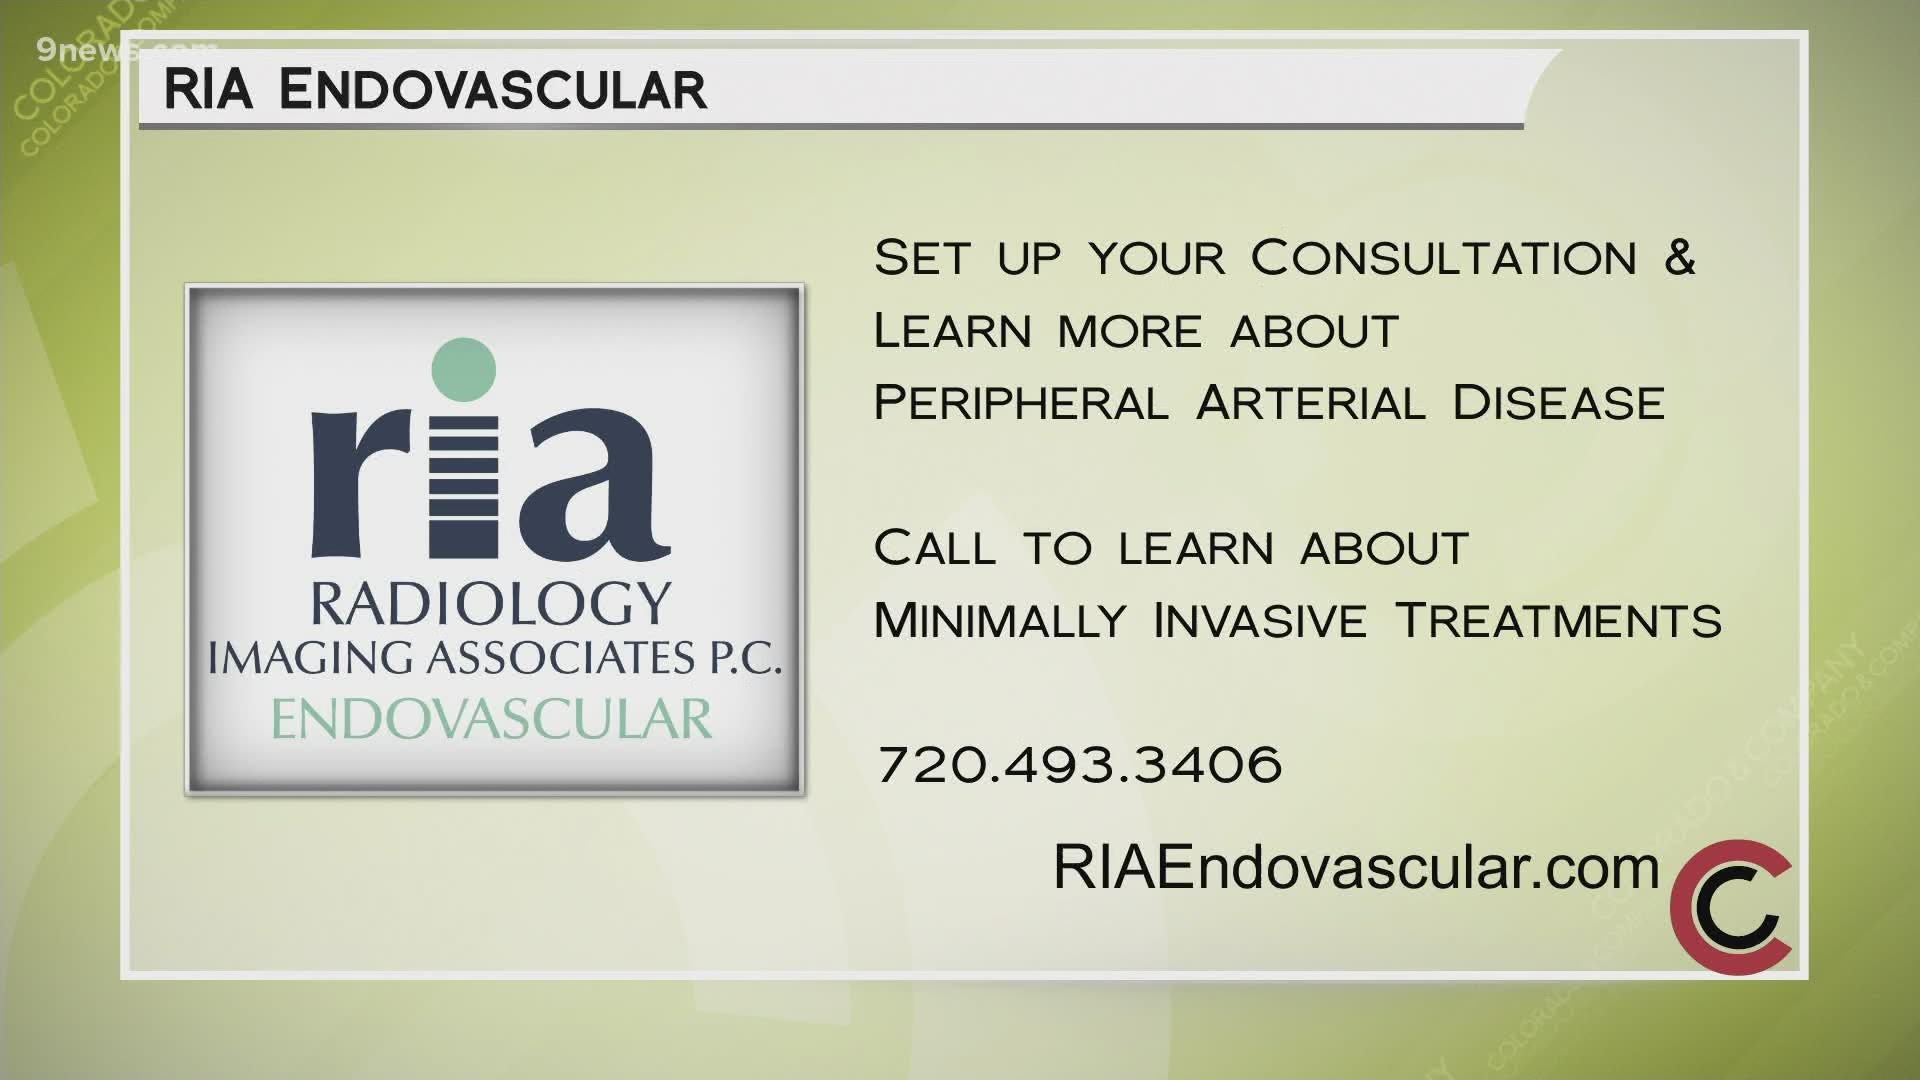 Call 720.493.3406 or visit RIAEndovascular.com to learn about treatment options that can help you with any of the symptoms related to peripheral arterial disease.